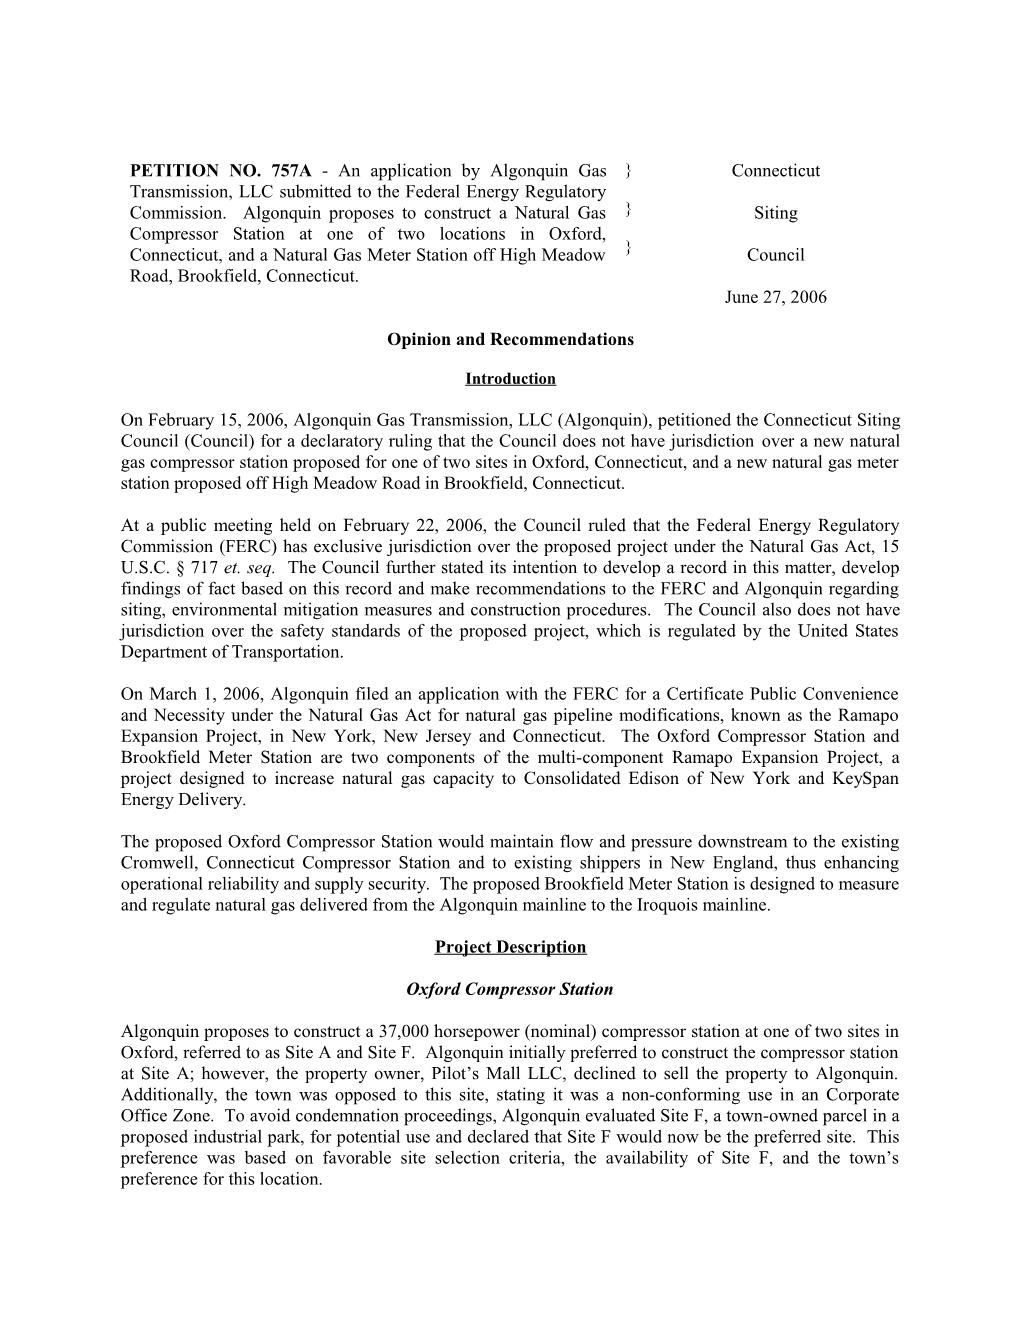 DOCKET NO. 187 - an Application by PDC - El Paso Milford LLC for a Certificate of Environmental